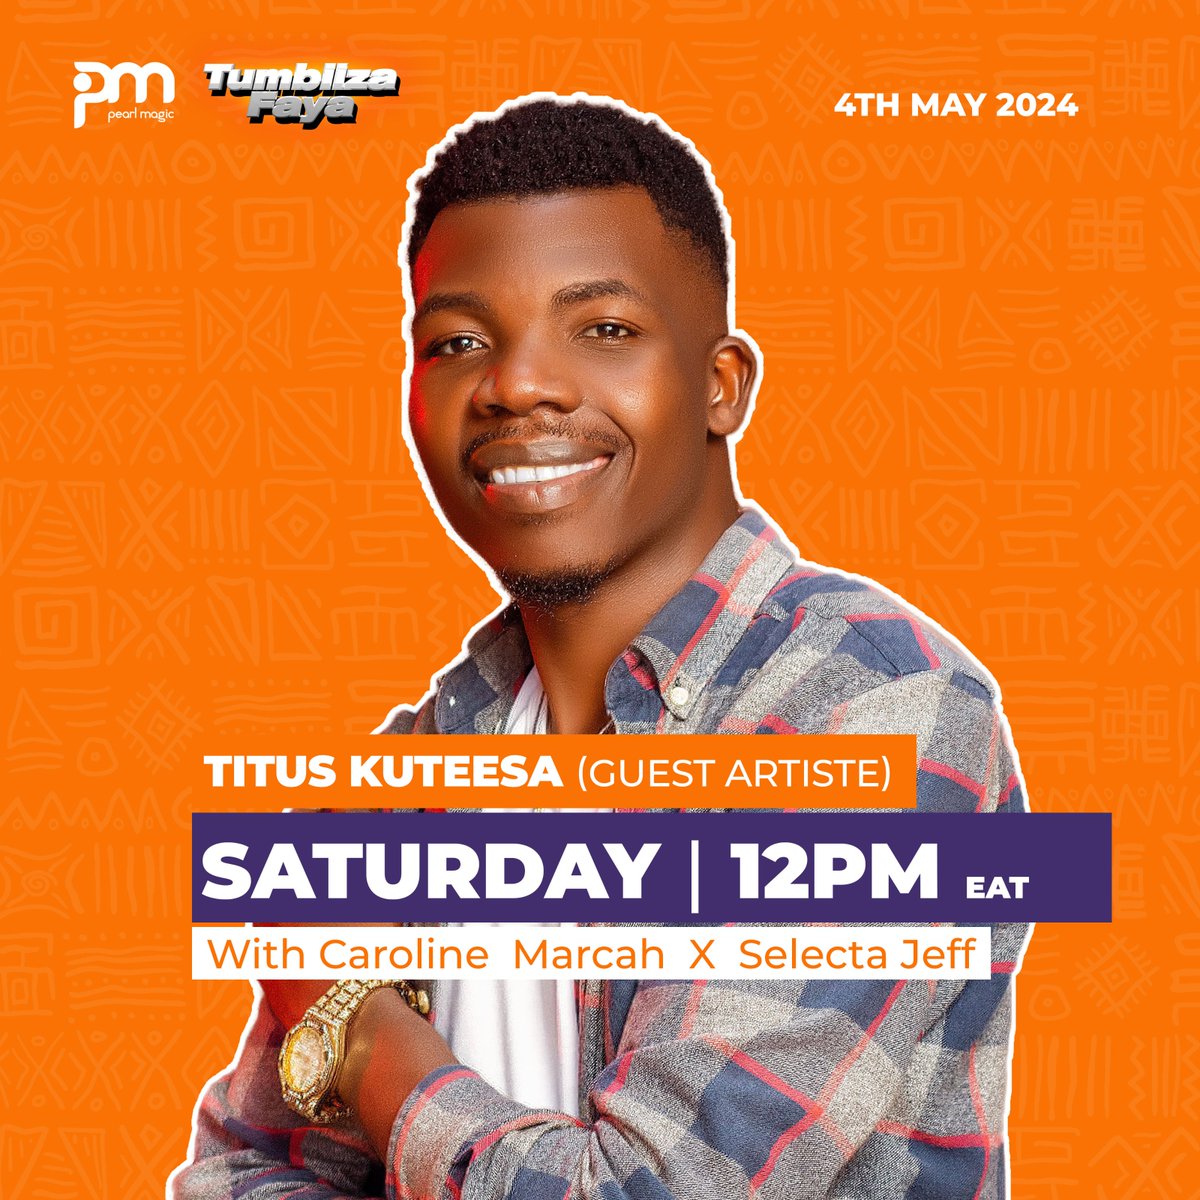 Elevate your soul this Saturday with the inspiring sounds of gospel music. @Tumbiizafaya welcomes the talented @KomezaCarol & @KuteesaTitus live from 12pm to 2pm. Join us for an afternoon filled with faith, music & tales only on @PearlMagicPrime 
#Tumbiizafaya #NdiMulokoleFest24